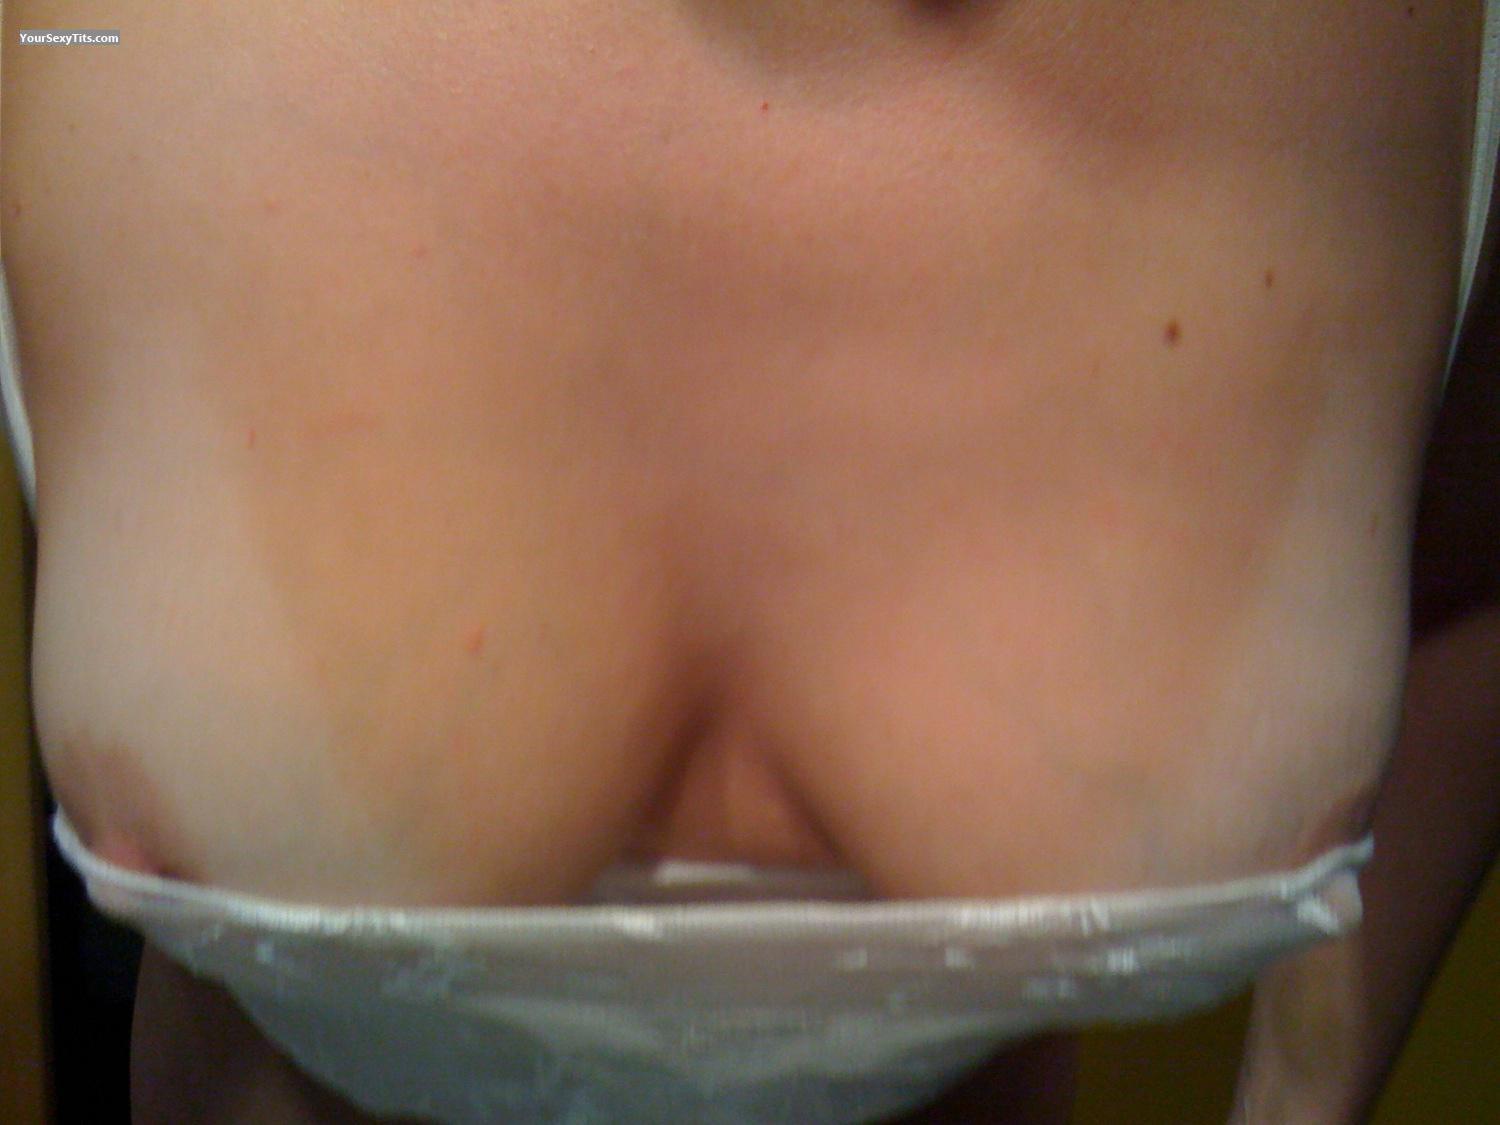 Tit Flash: My Medium Tits By IPhone (Selfie) - LittleBabs from France